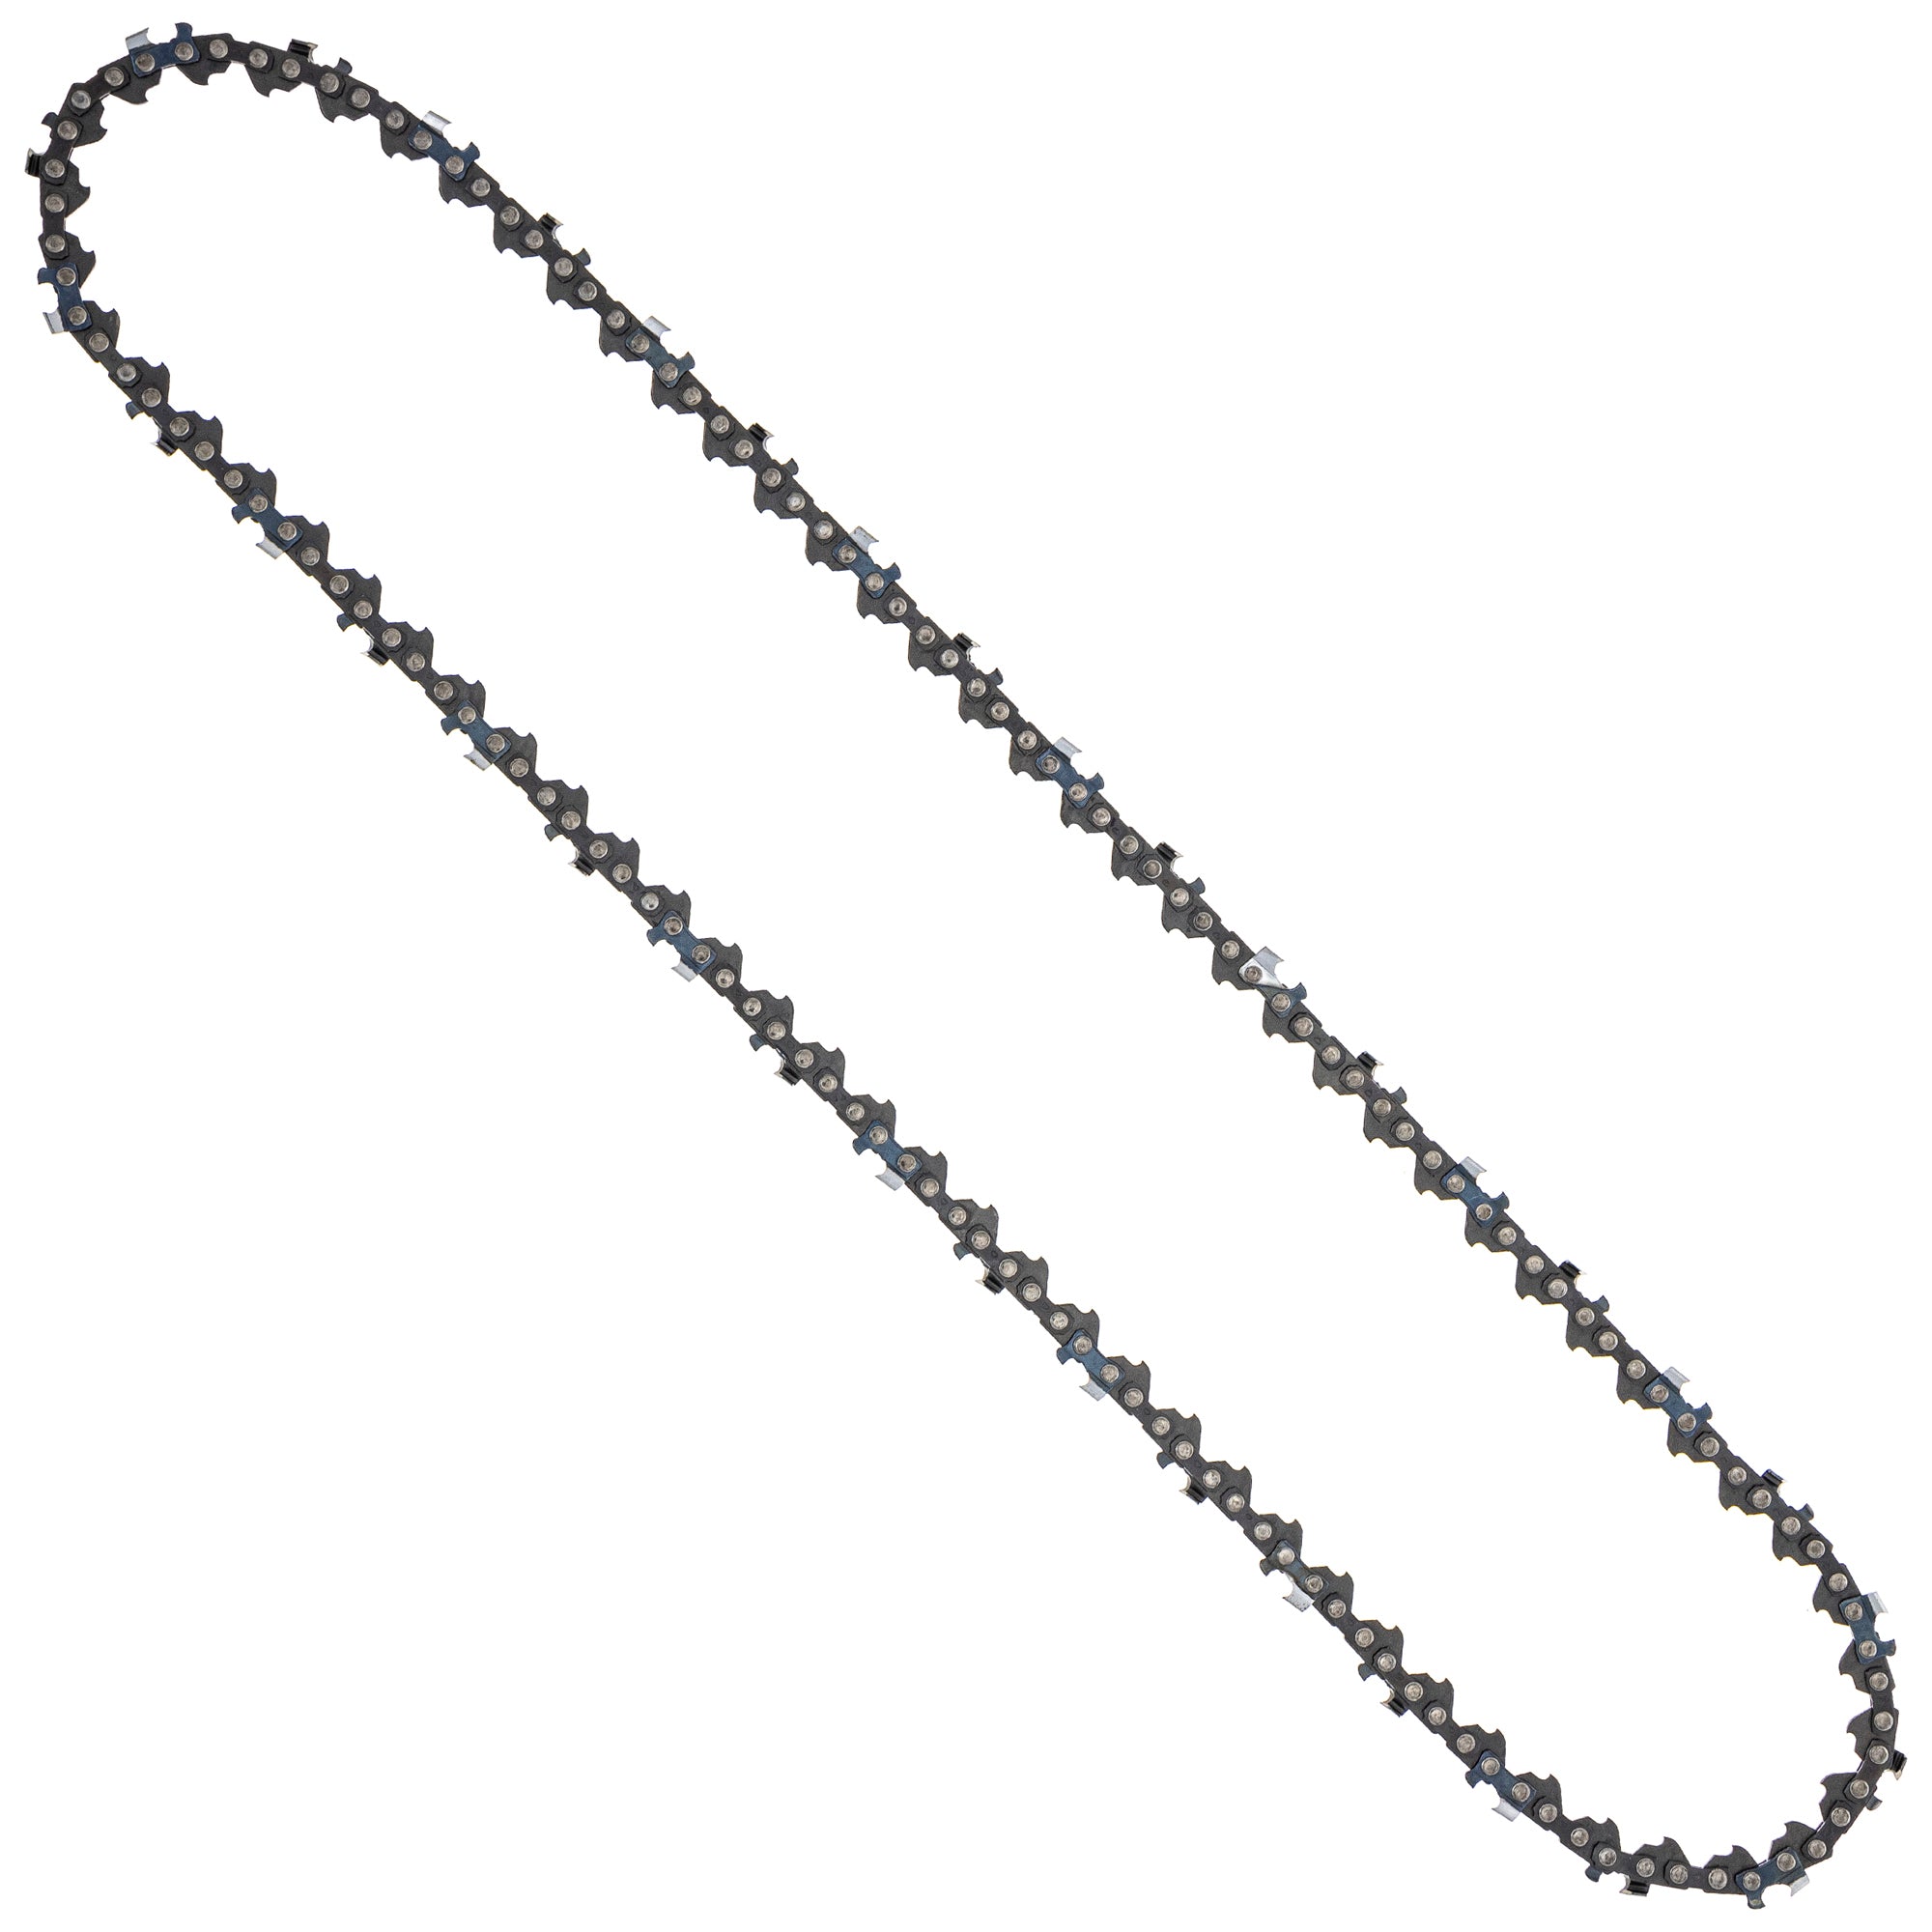 8TEN 810-CCC2296H Chain 3-Pack for zOTHER MSA 14